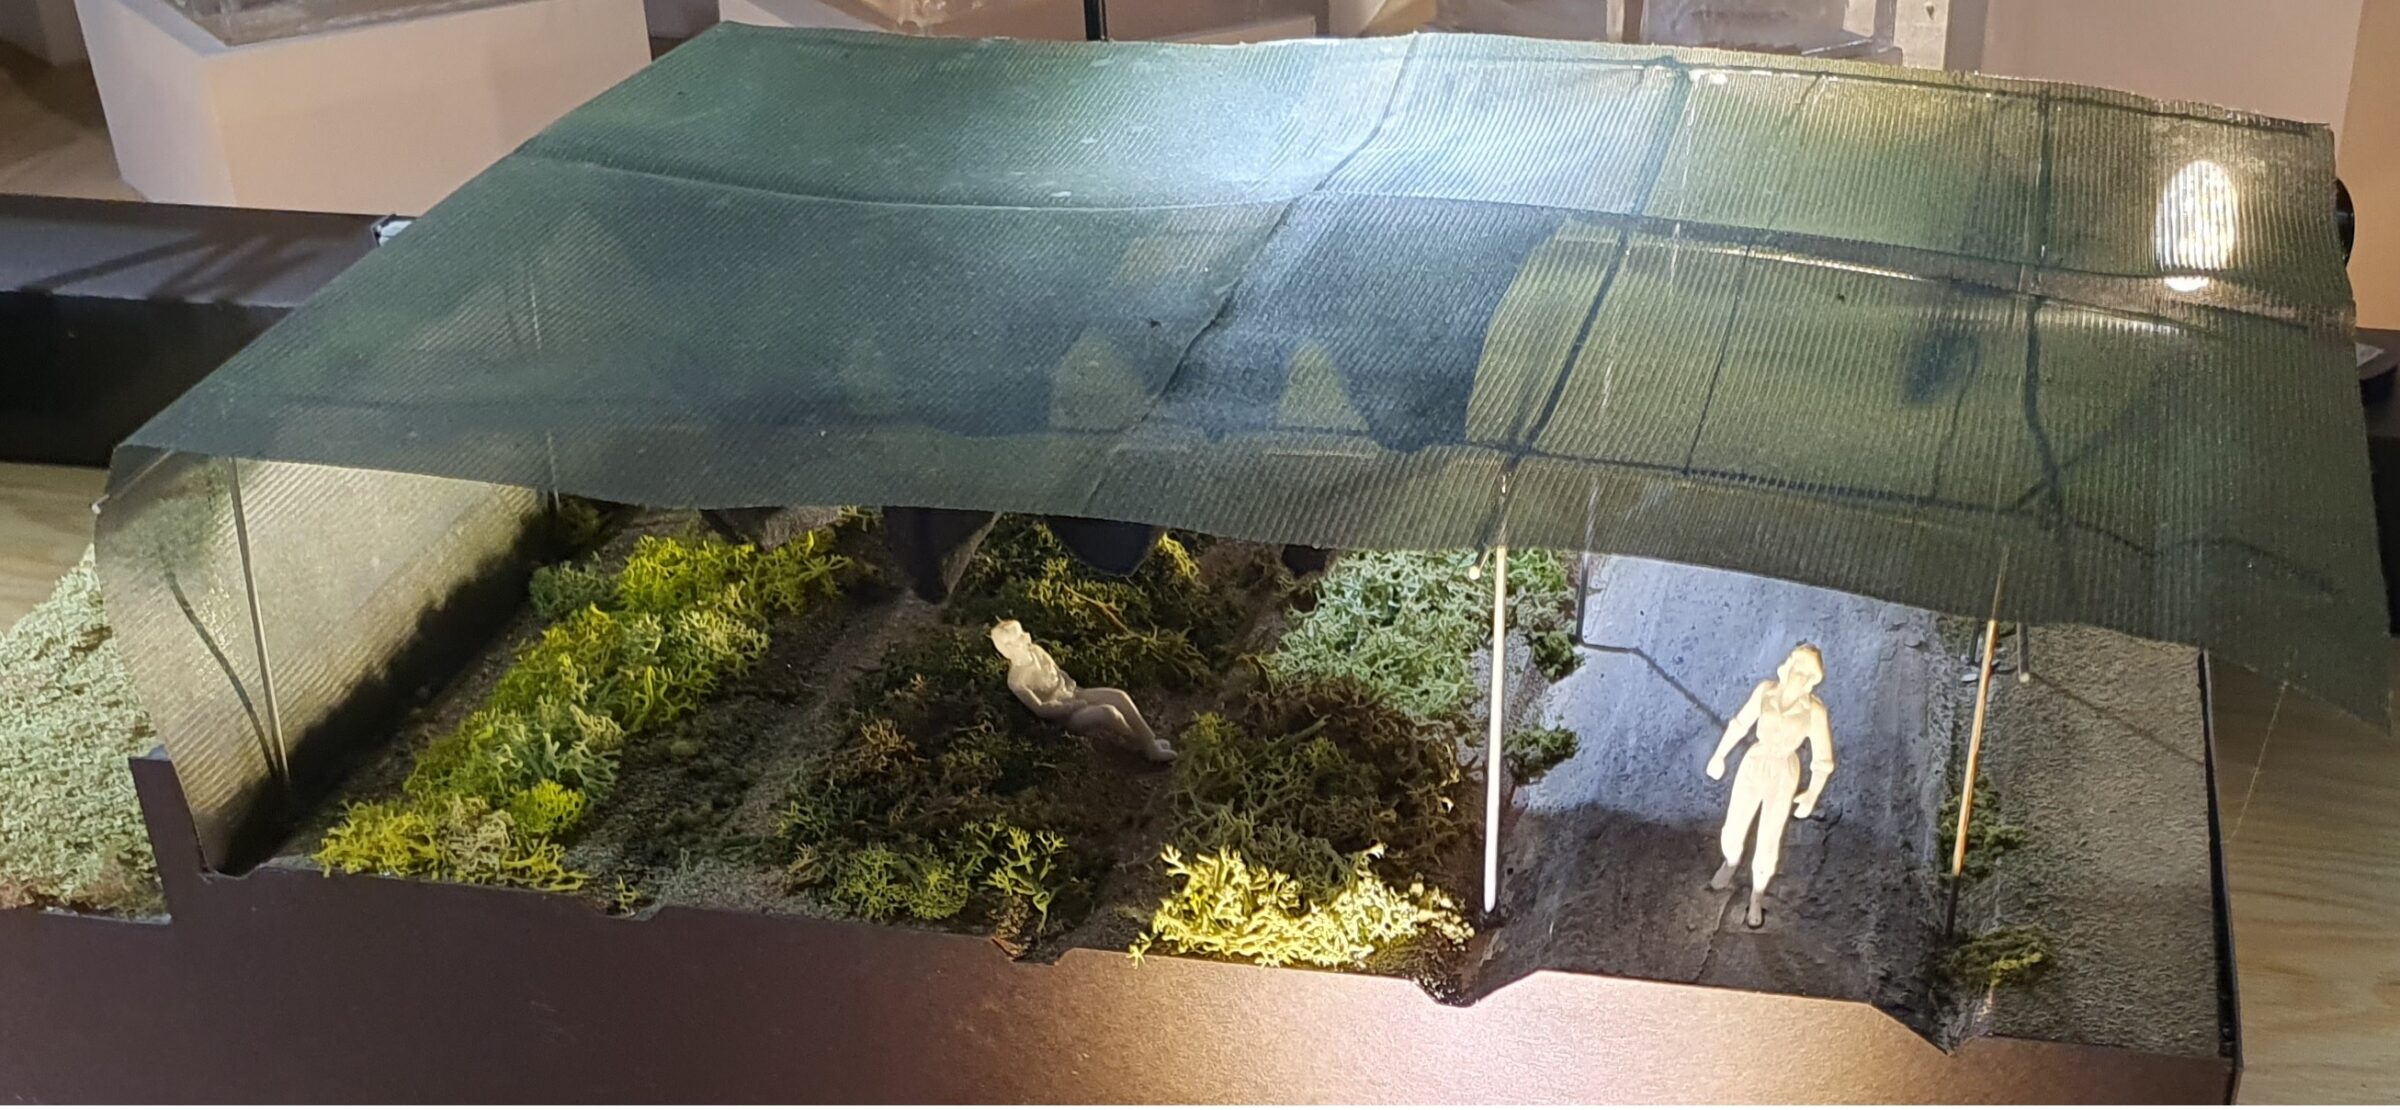 a model of a vegetable plot cover by a permeable cover about 2.4 m above the crop